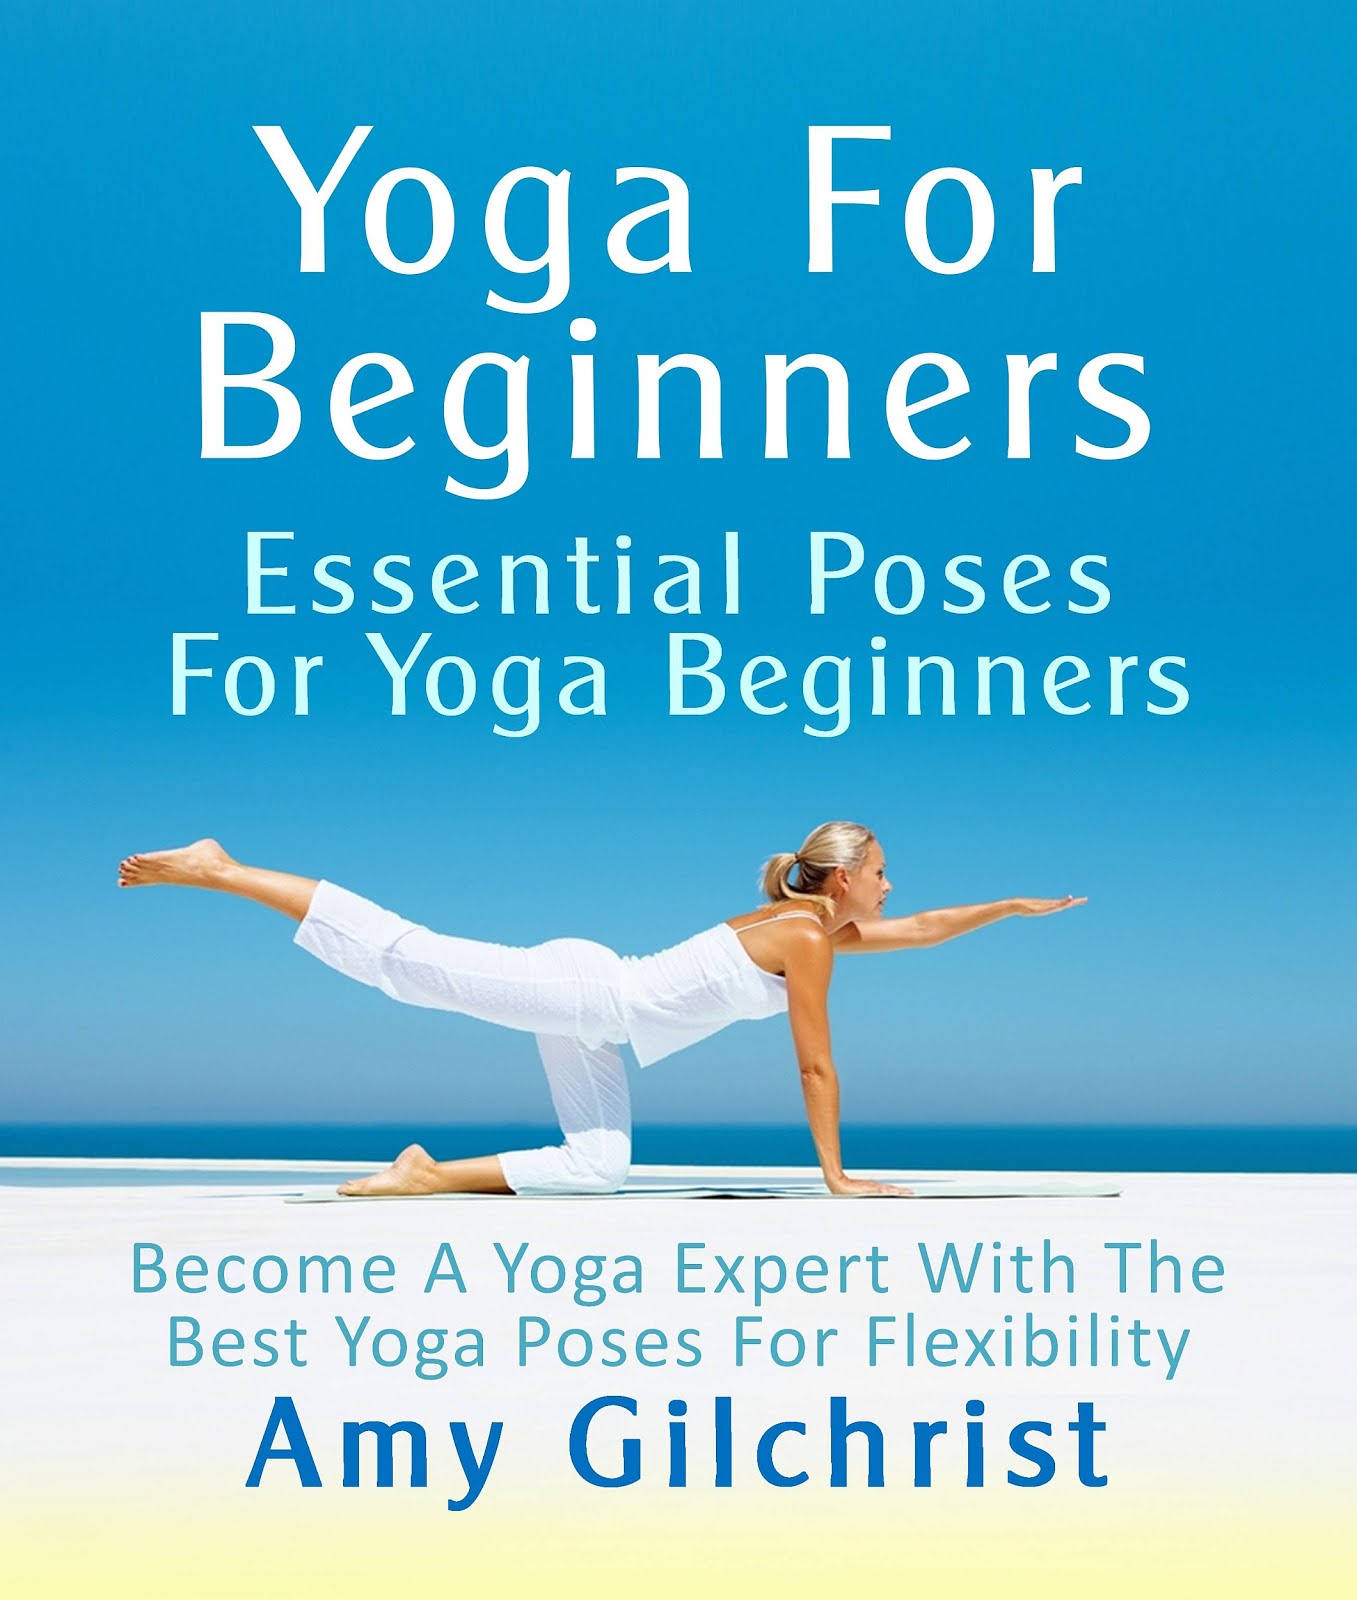 For yoga Poses  basic Become home Yoga  A for  Essential at Yoga Beginners poses  Beginners:  Yoga For beginners